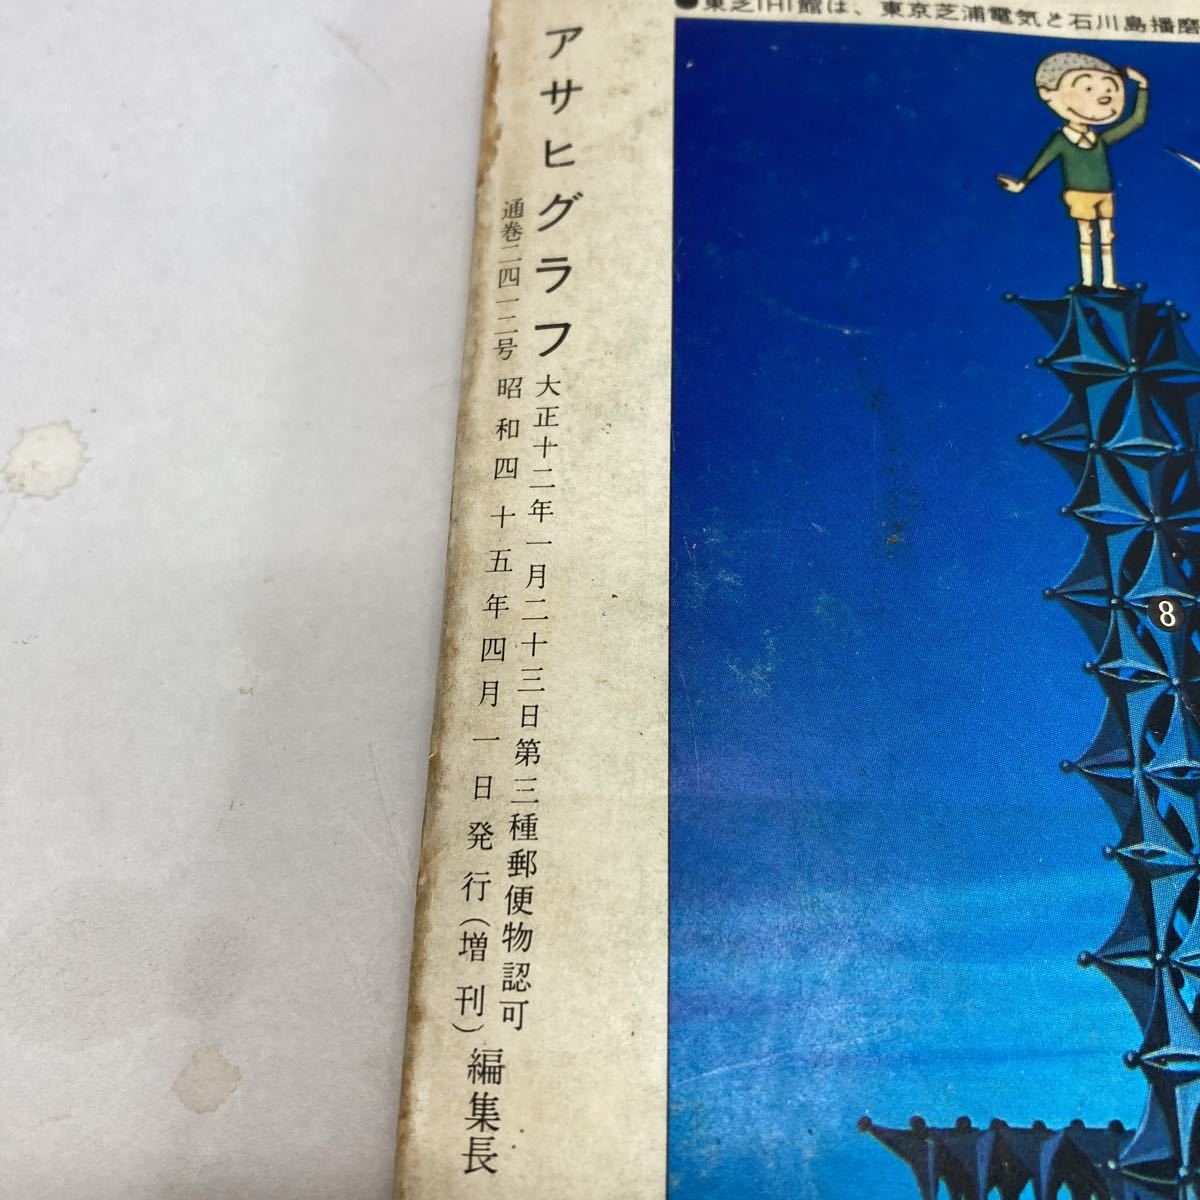  Asahi Graph Showa era 45 year 4 month 1 day issue increase . commencement! Japan ten thousand country . extract po1970 year Showa Retro that time thing magazine booklet 